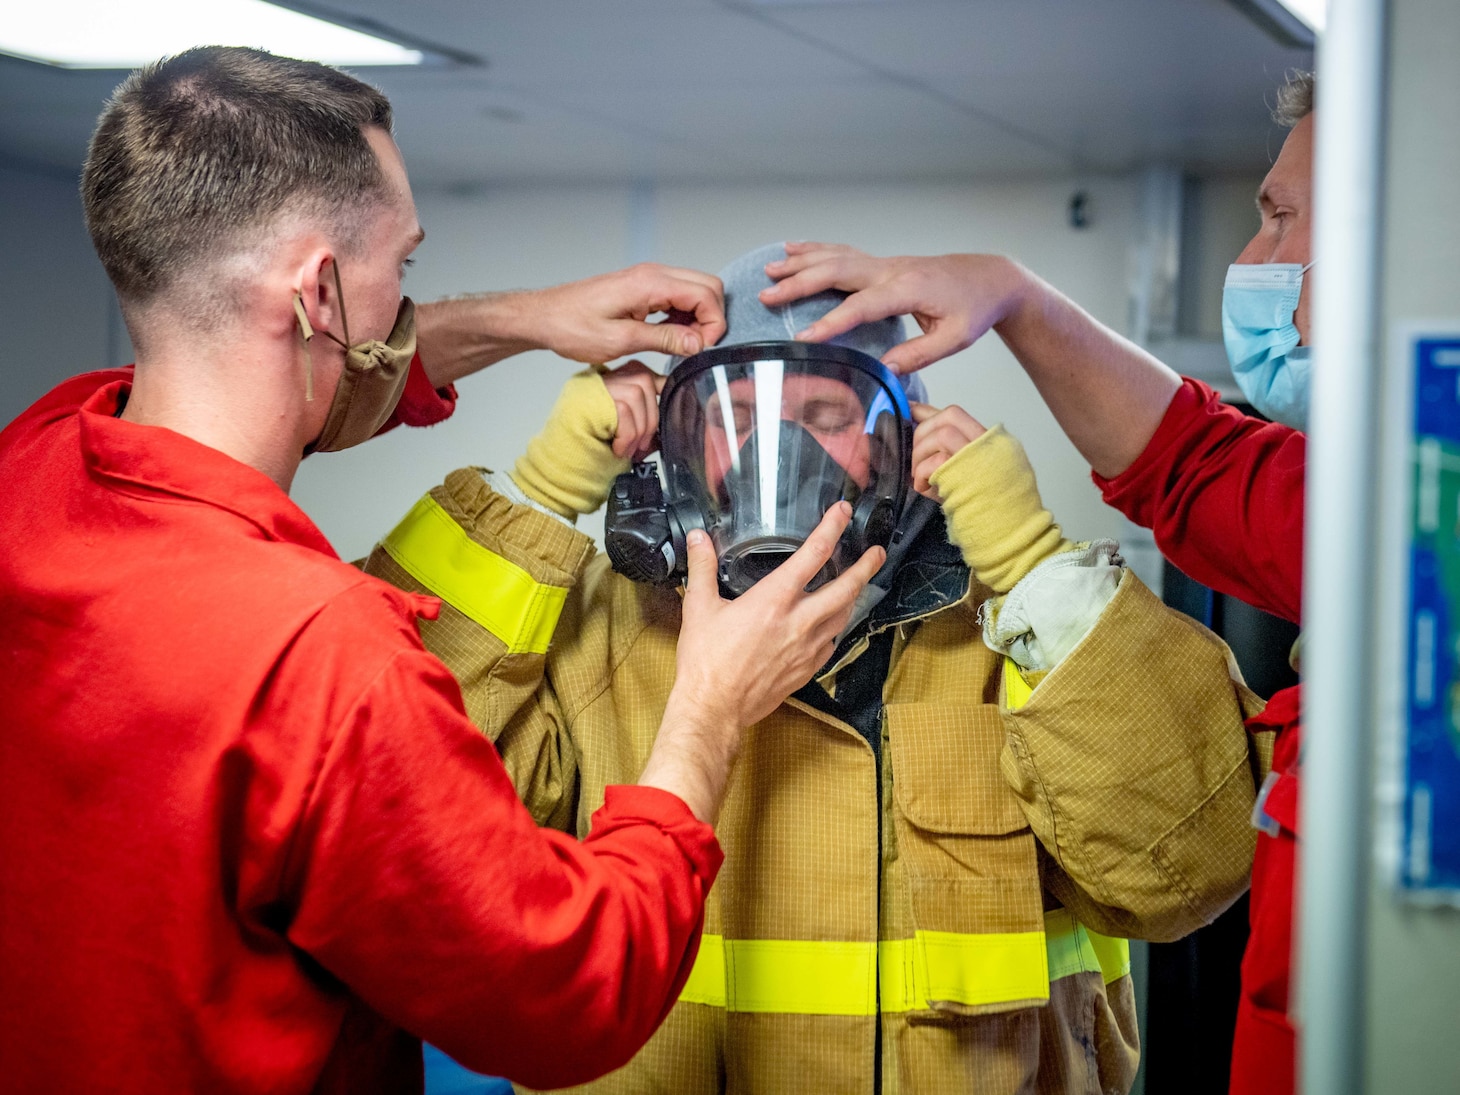 Mineman Seaman Timothy Messick, from Panama City, Fla., center, dons firefighting equipment during a damage control training exercise aboard the Independence-variant littoral combat ship USS Charleston (LCS 18).